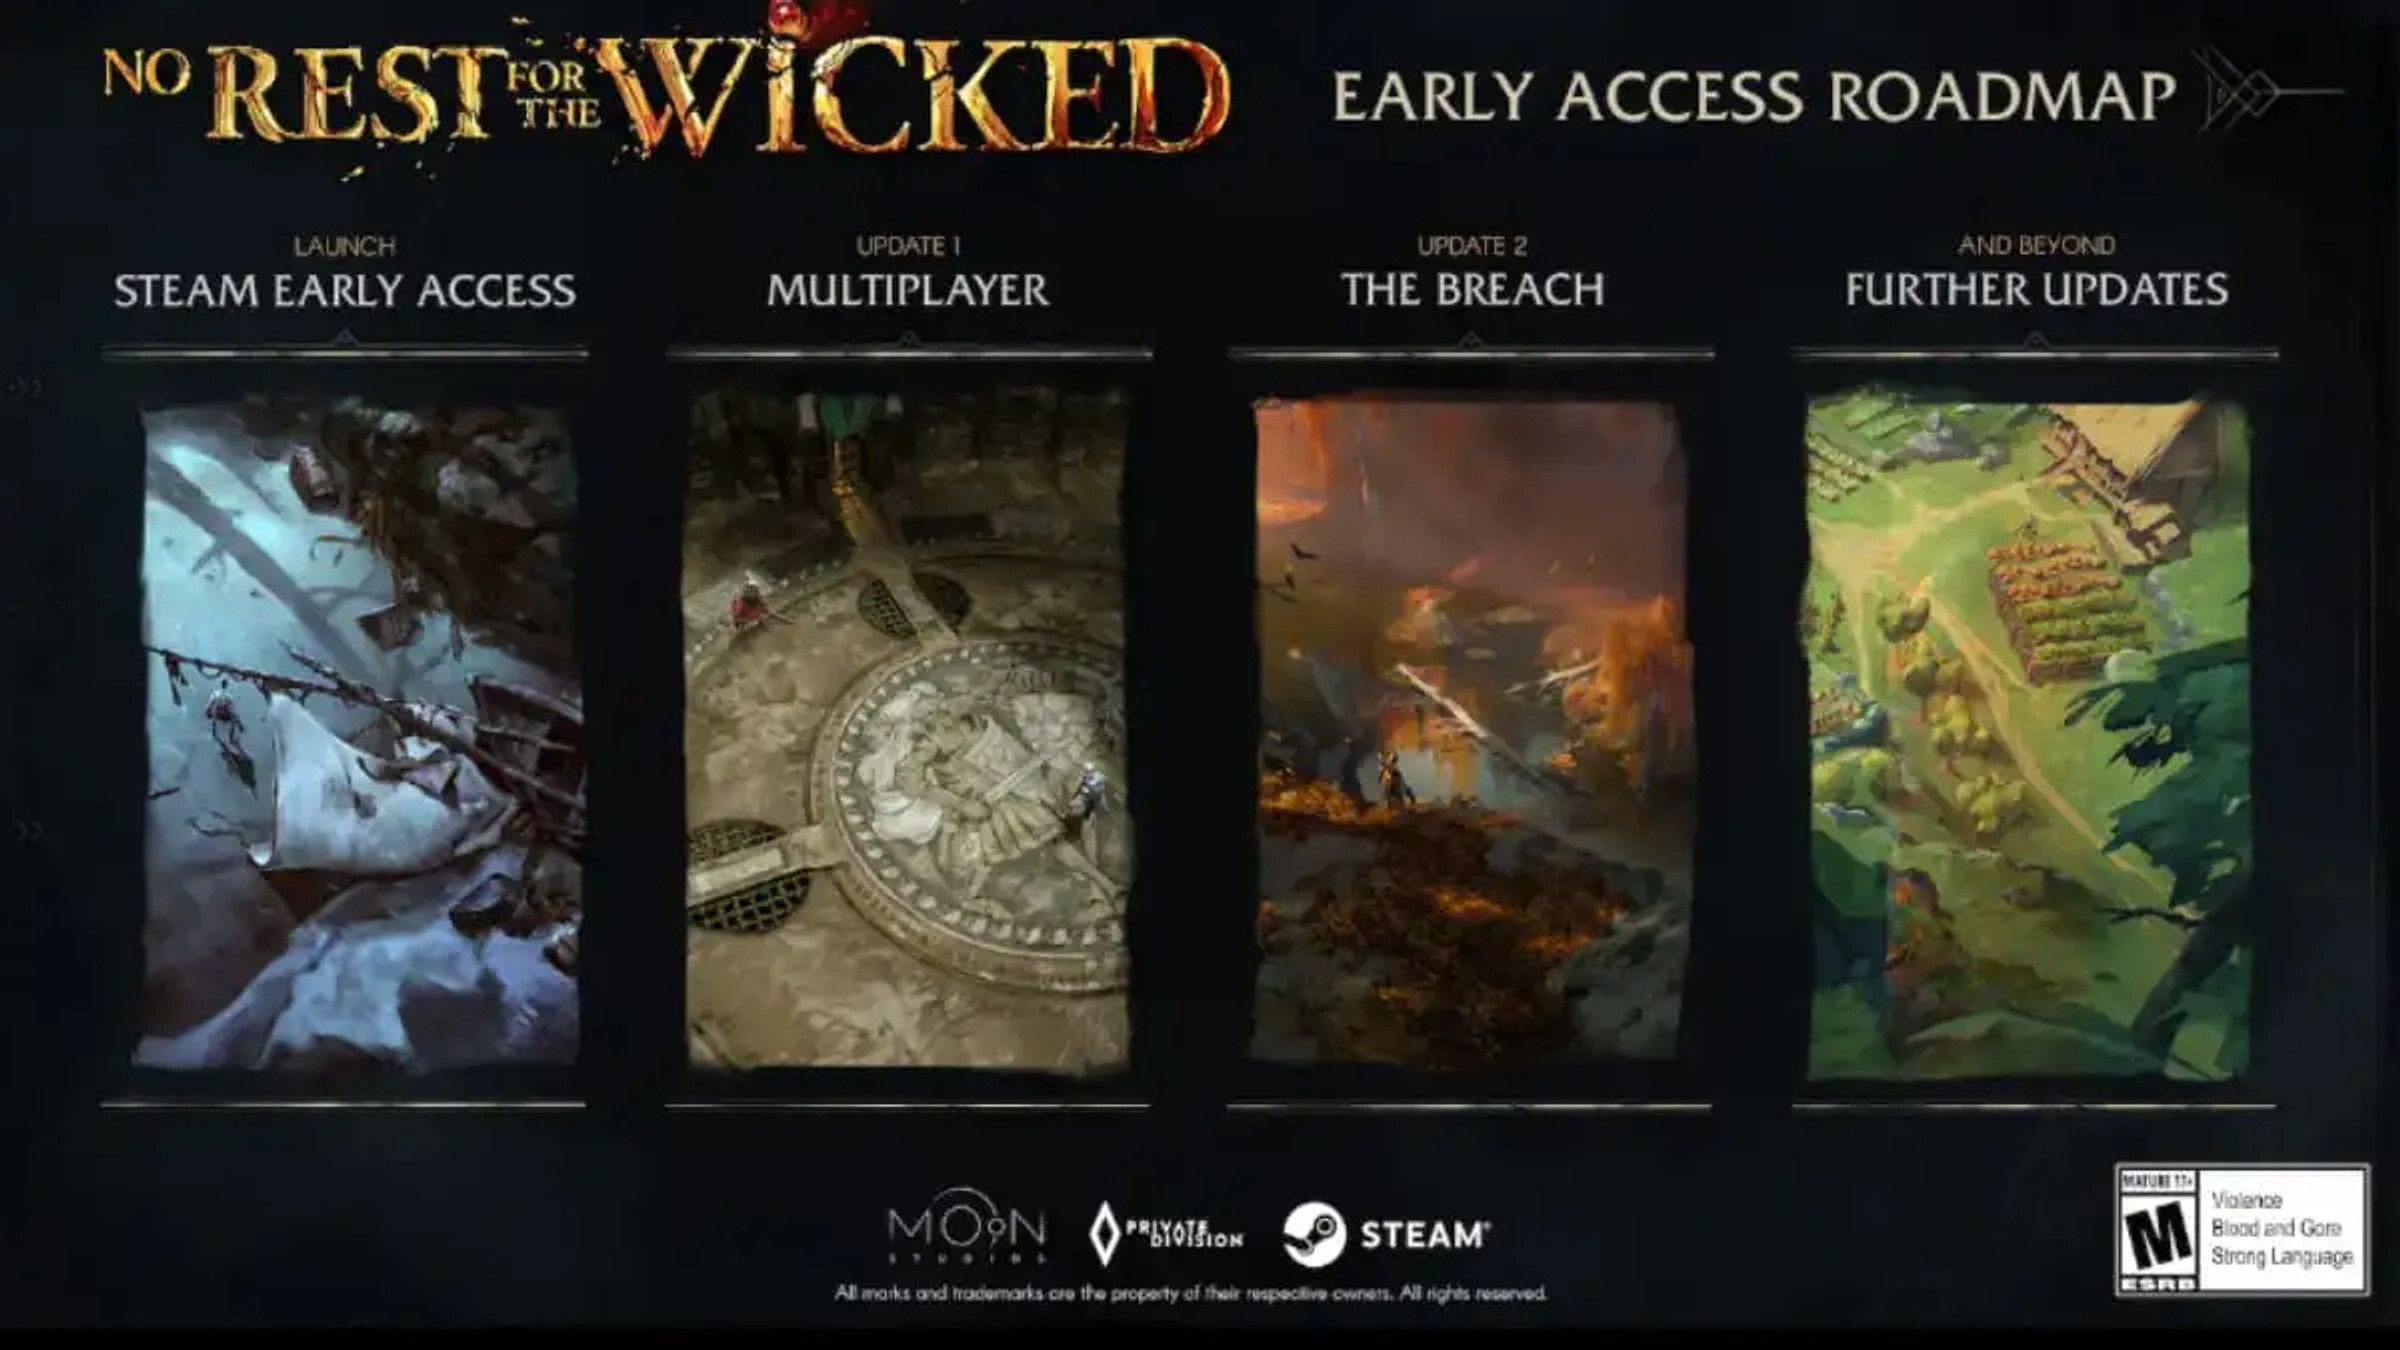 No-Rest-for-the-Wicked-Roadmap-1